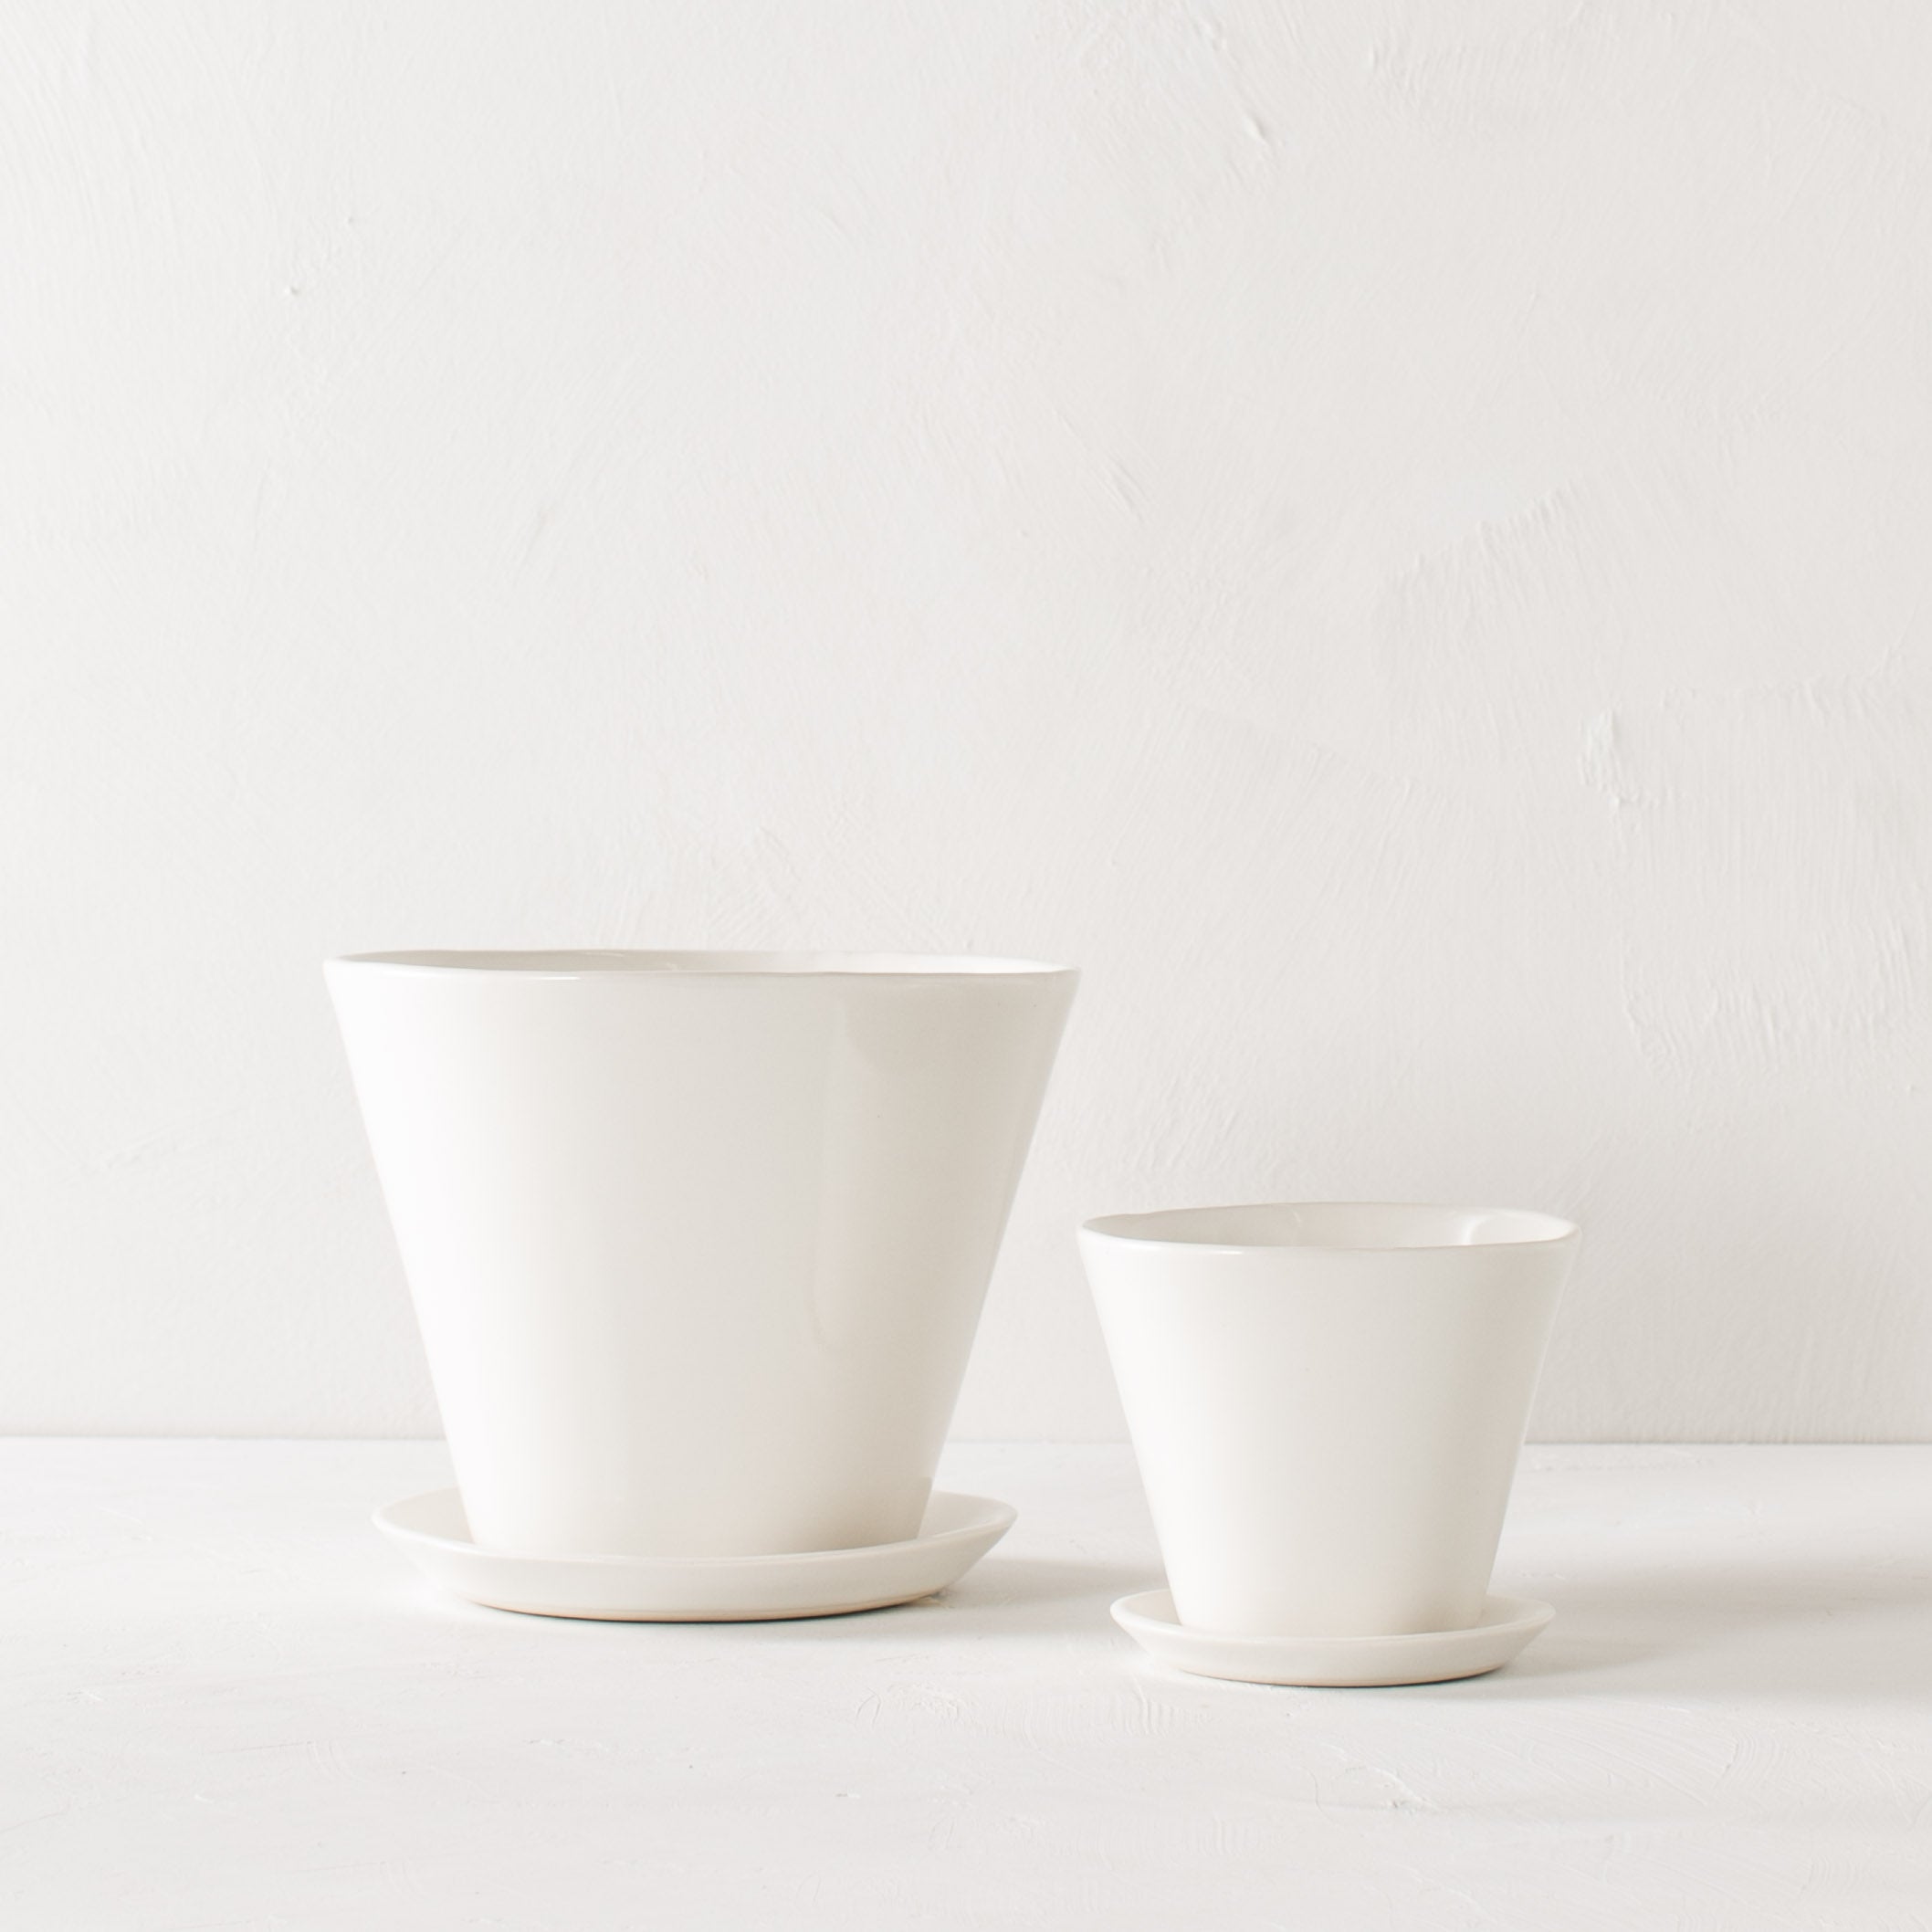 Two white tapered ceramic planter side by side. One larger (7 inches) the other smaller (4 inches ). Both have bottom drainage dishes as well as plants inside. Background is a textured white and the table top mimics the wall design. Designed and sold by Convivial Production, Kansas City Ceramics.